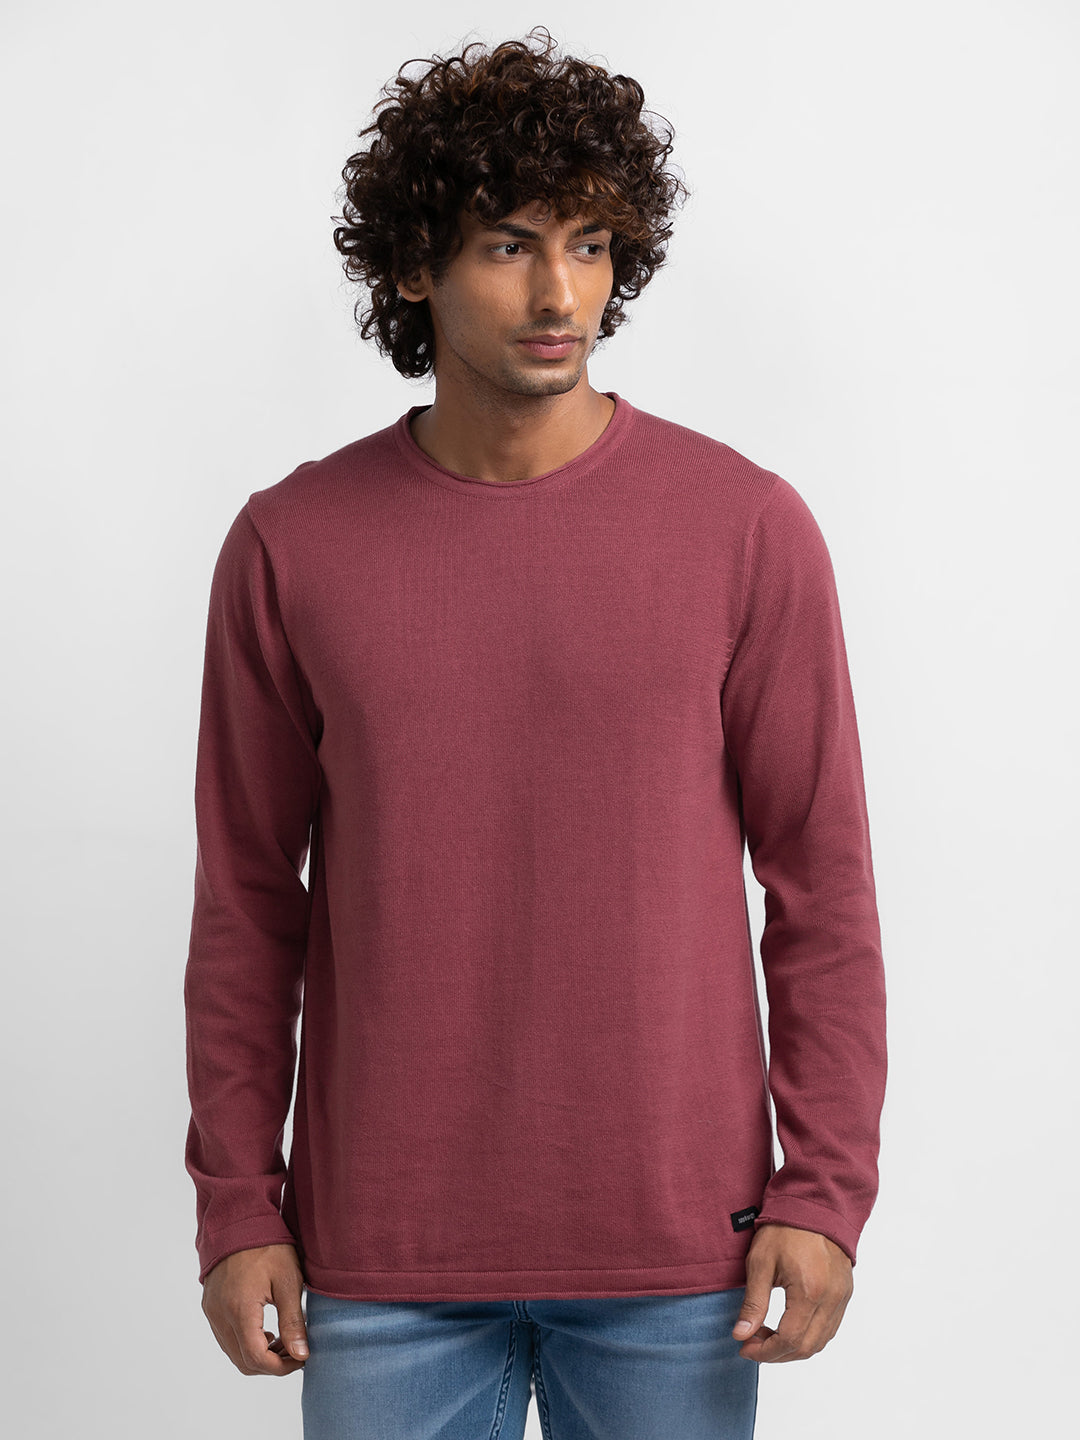 Spykar Mauve Red Cotton Full Sleeve Casual Sweater For Men